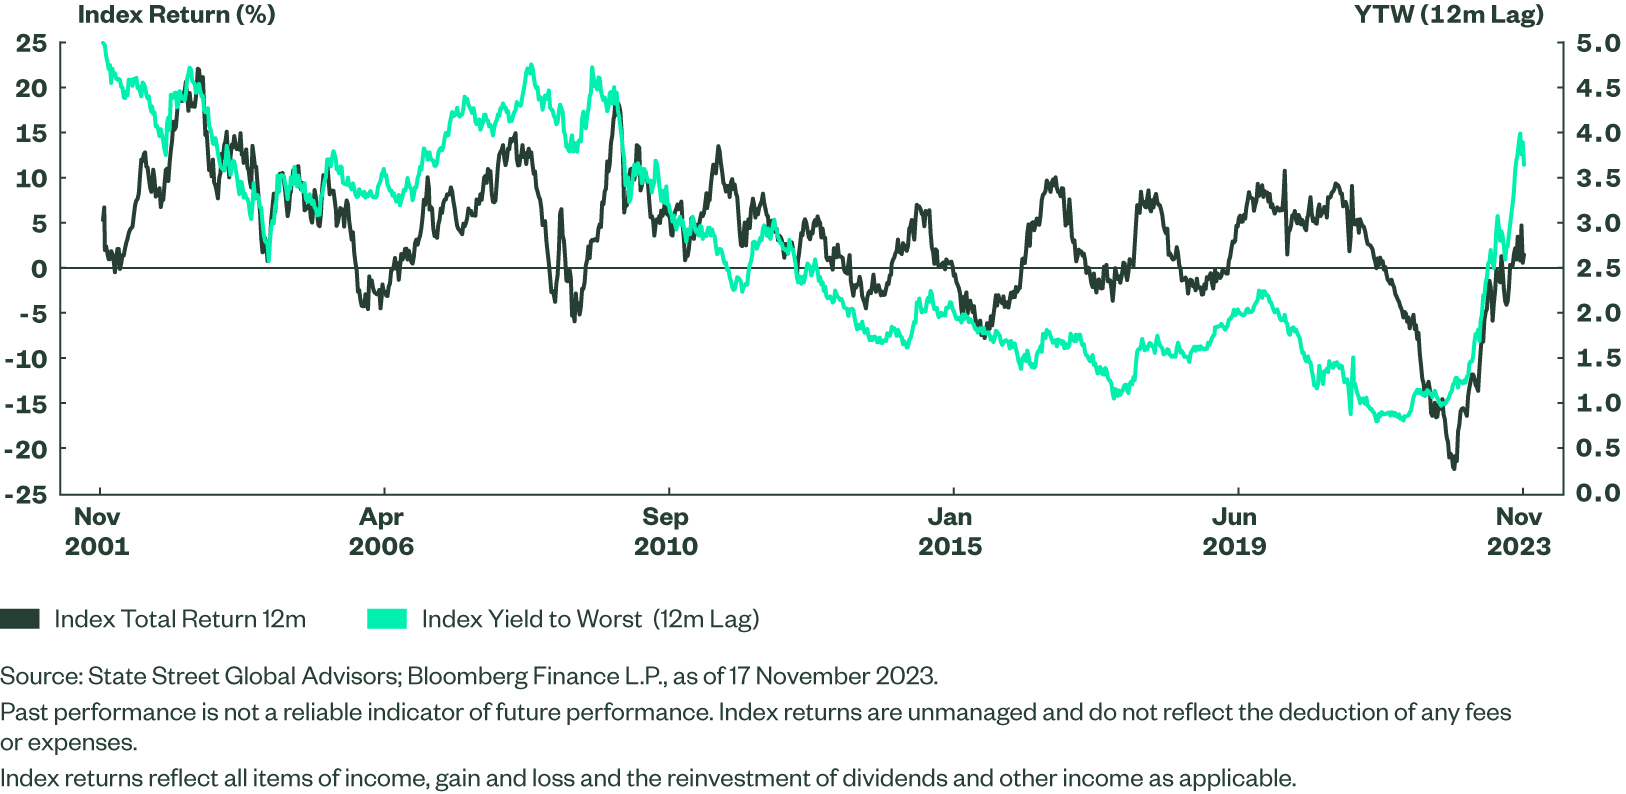 Figure 1: Yield to worst a year prior to returns for the Bloomberg Global Aggregate Index 